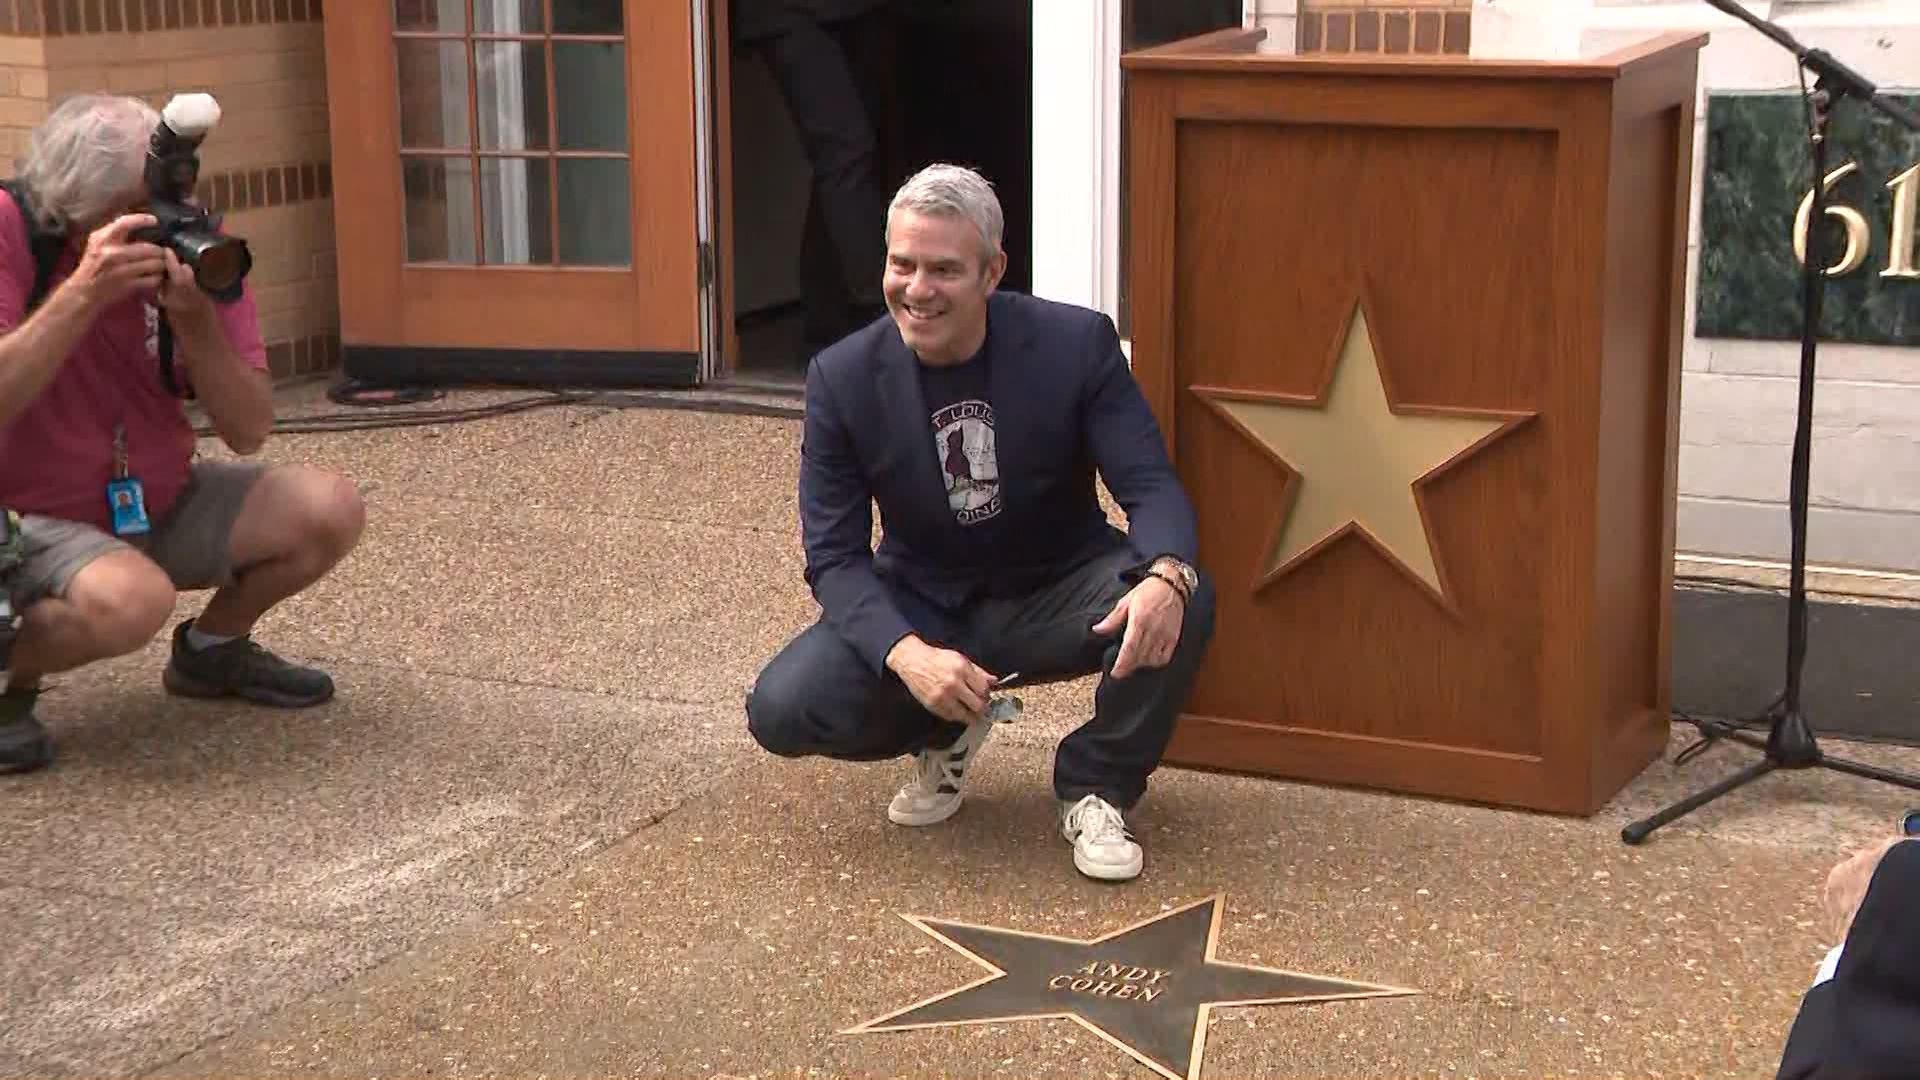 Andy Cohen, the host of Bravo's "What What Happens Live," was inducted Friday night into the St. Louis Walk of Fame.